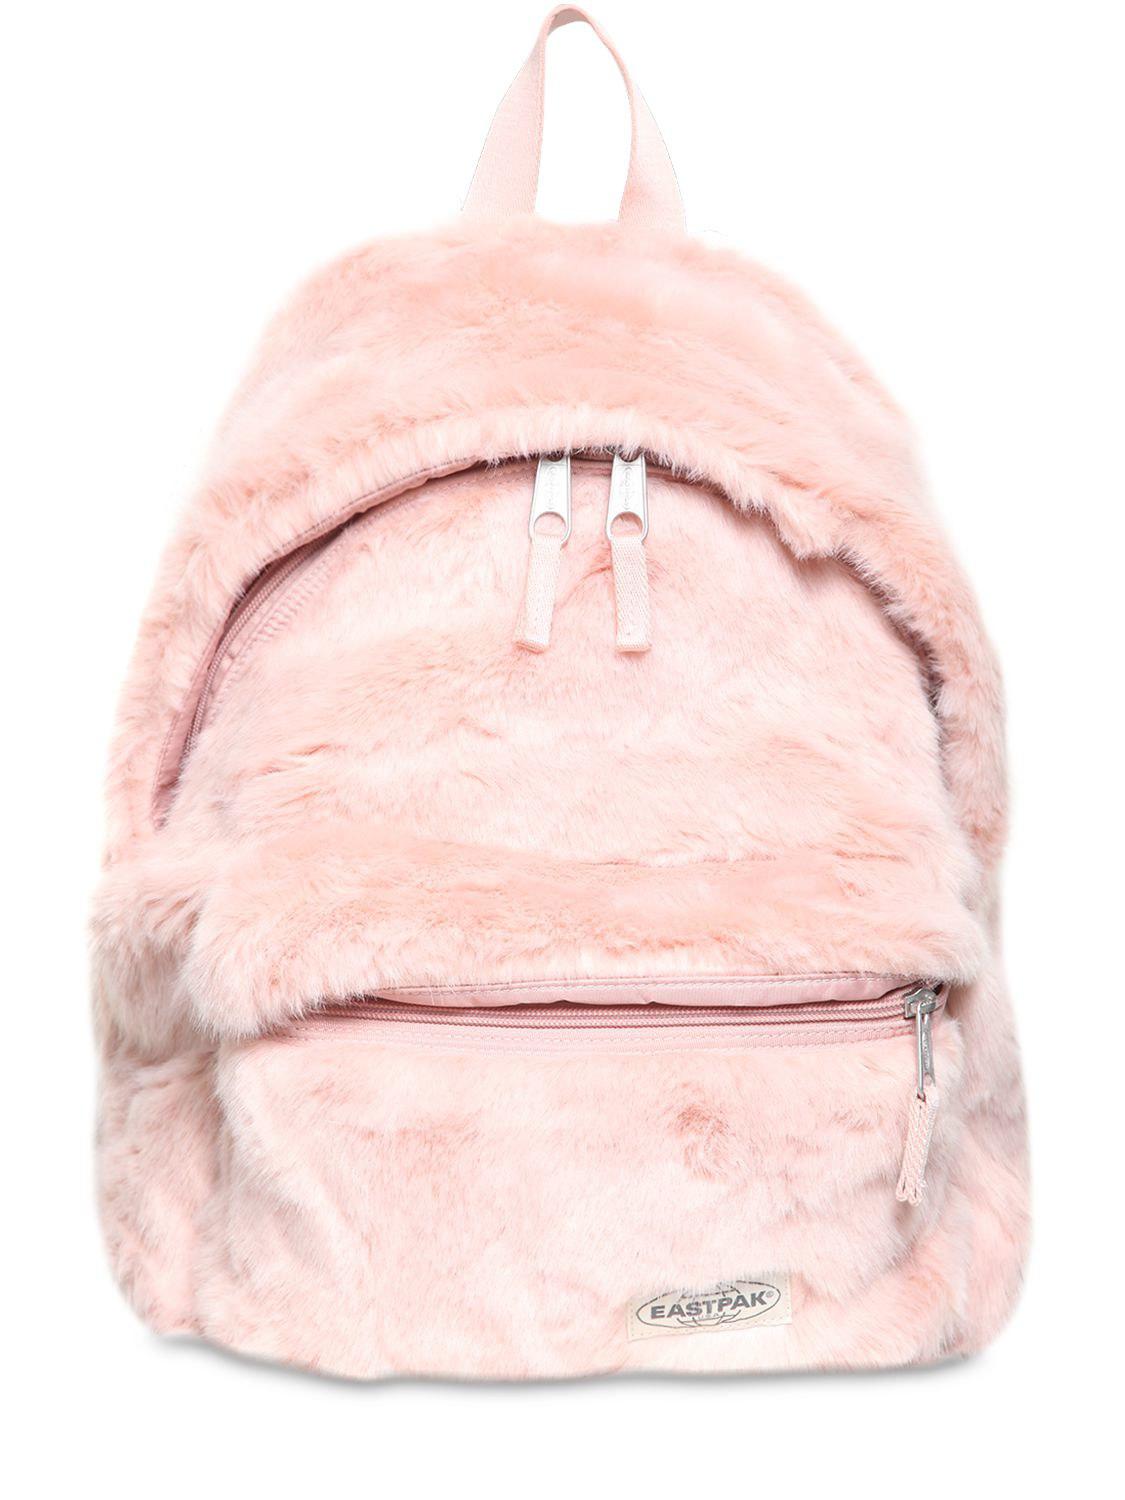 Eastpak Leather 24l Padded Pak'r Faux Fur Backpack in Pink - Lyst